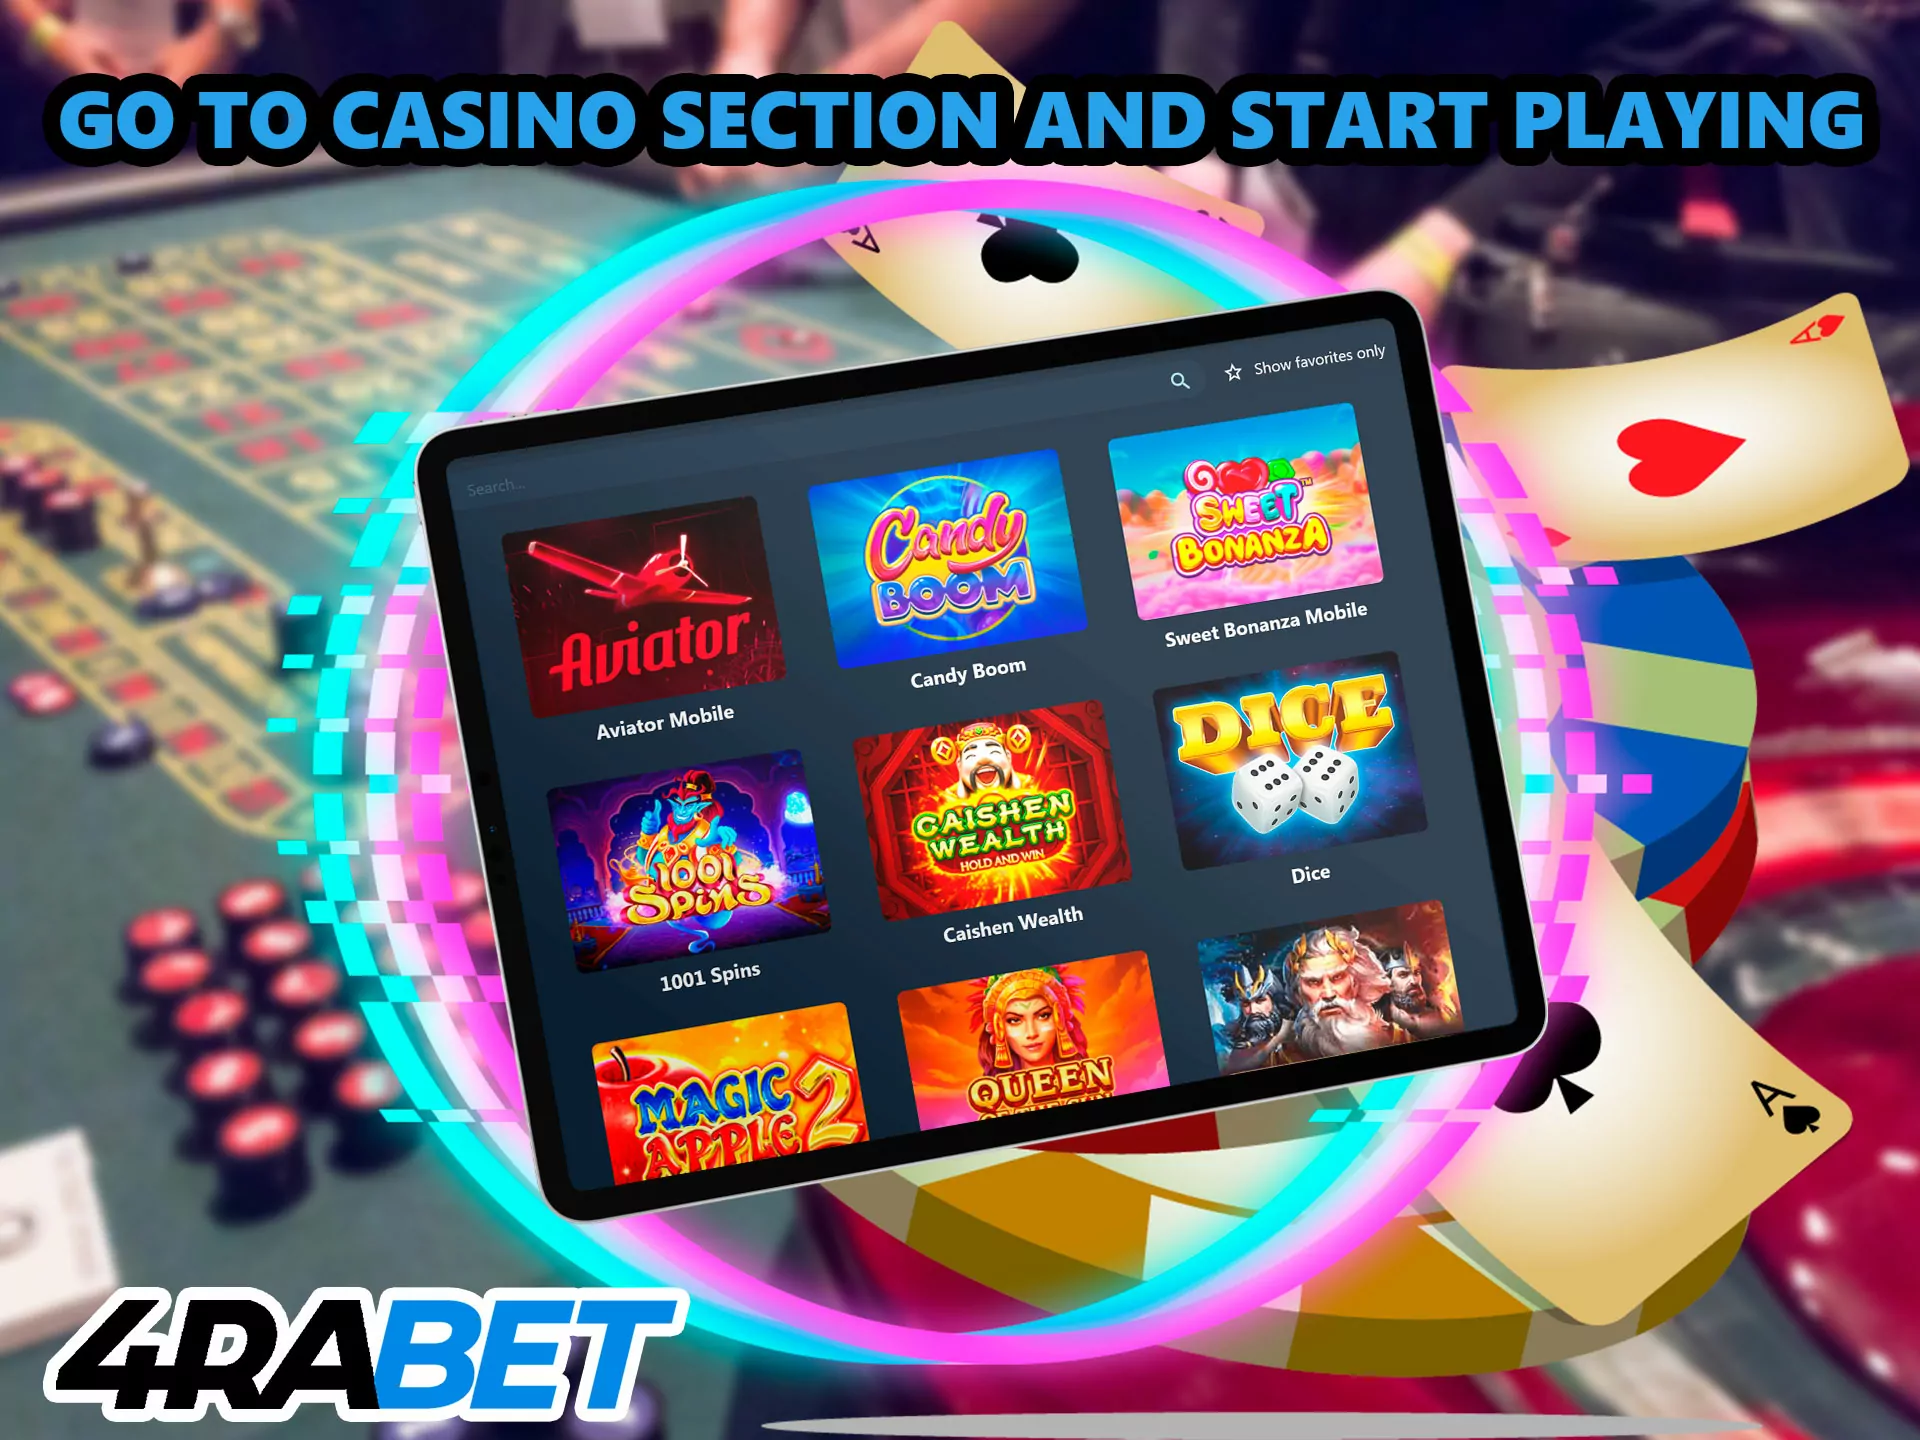 Next, select the section that you like on the main page of the gambler and start the game.